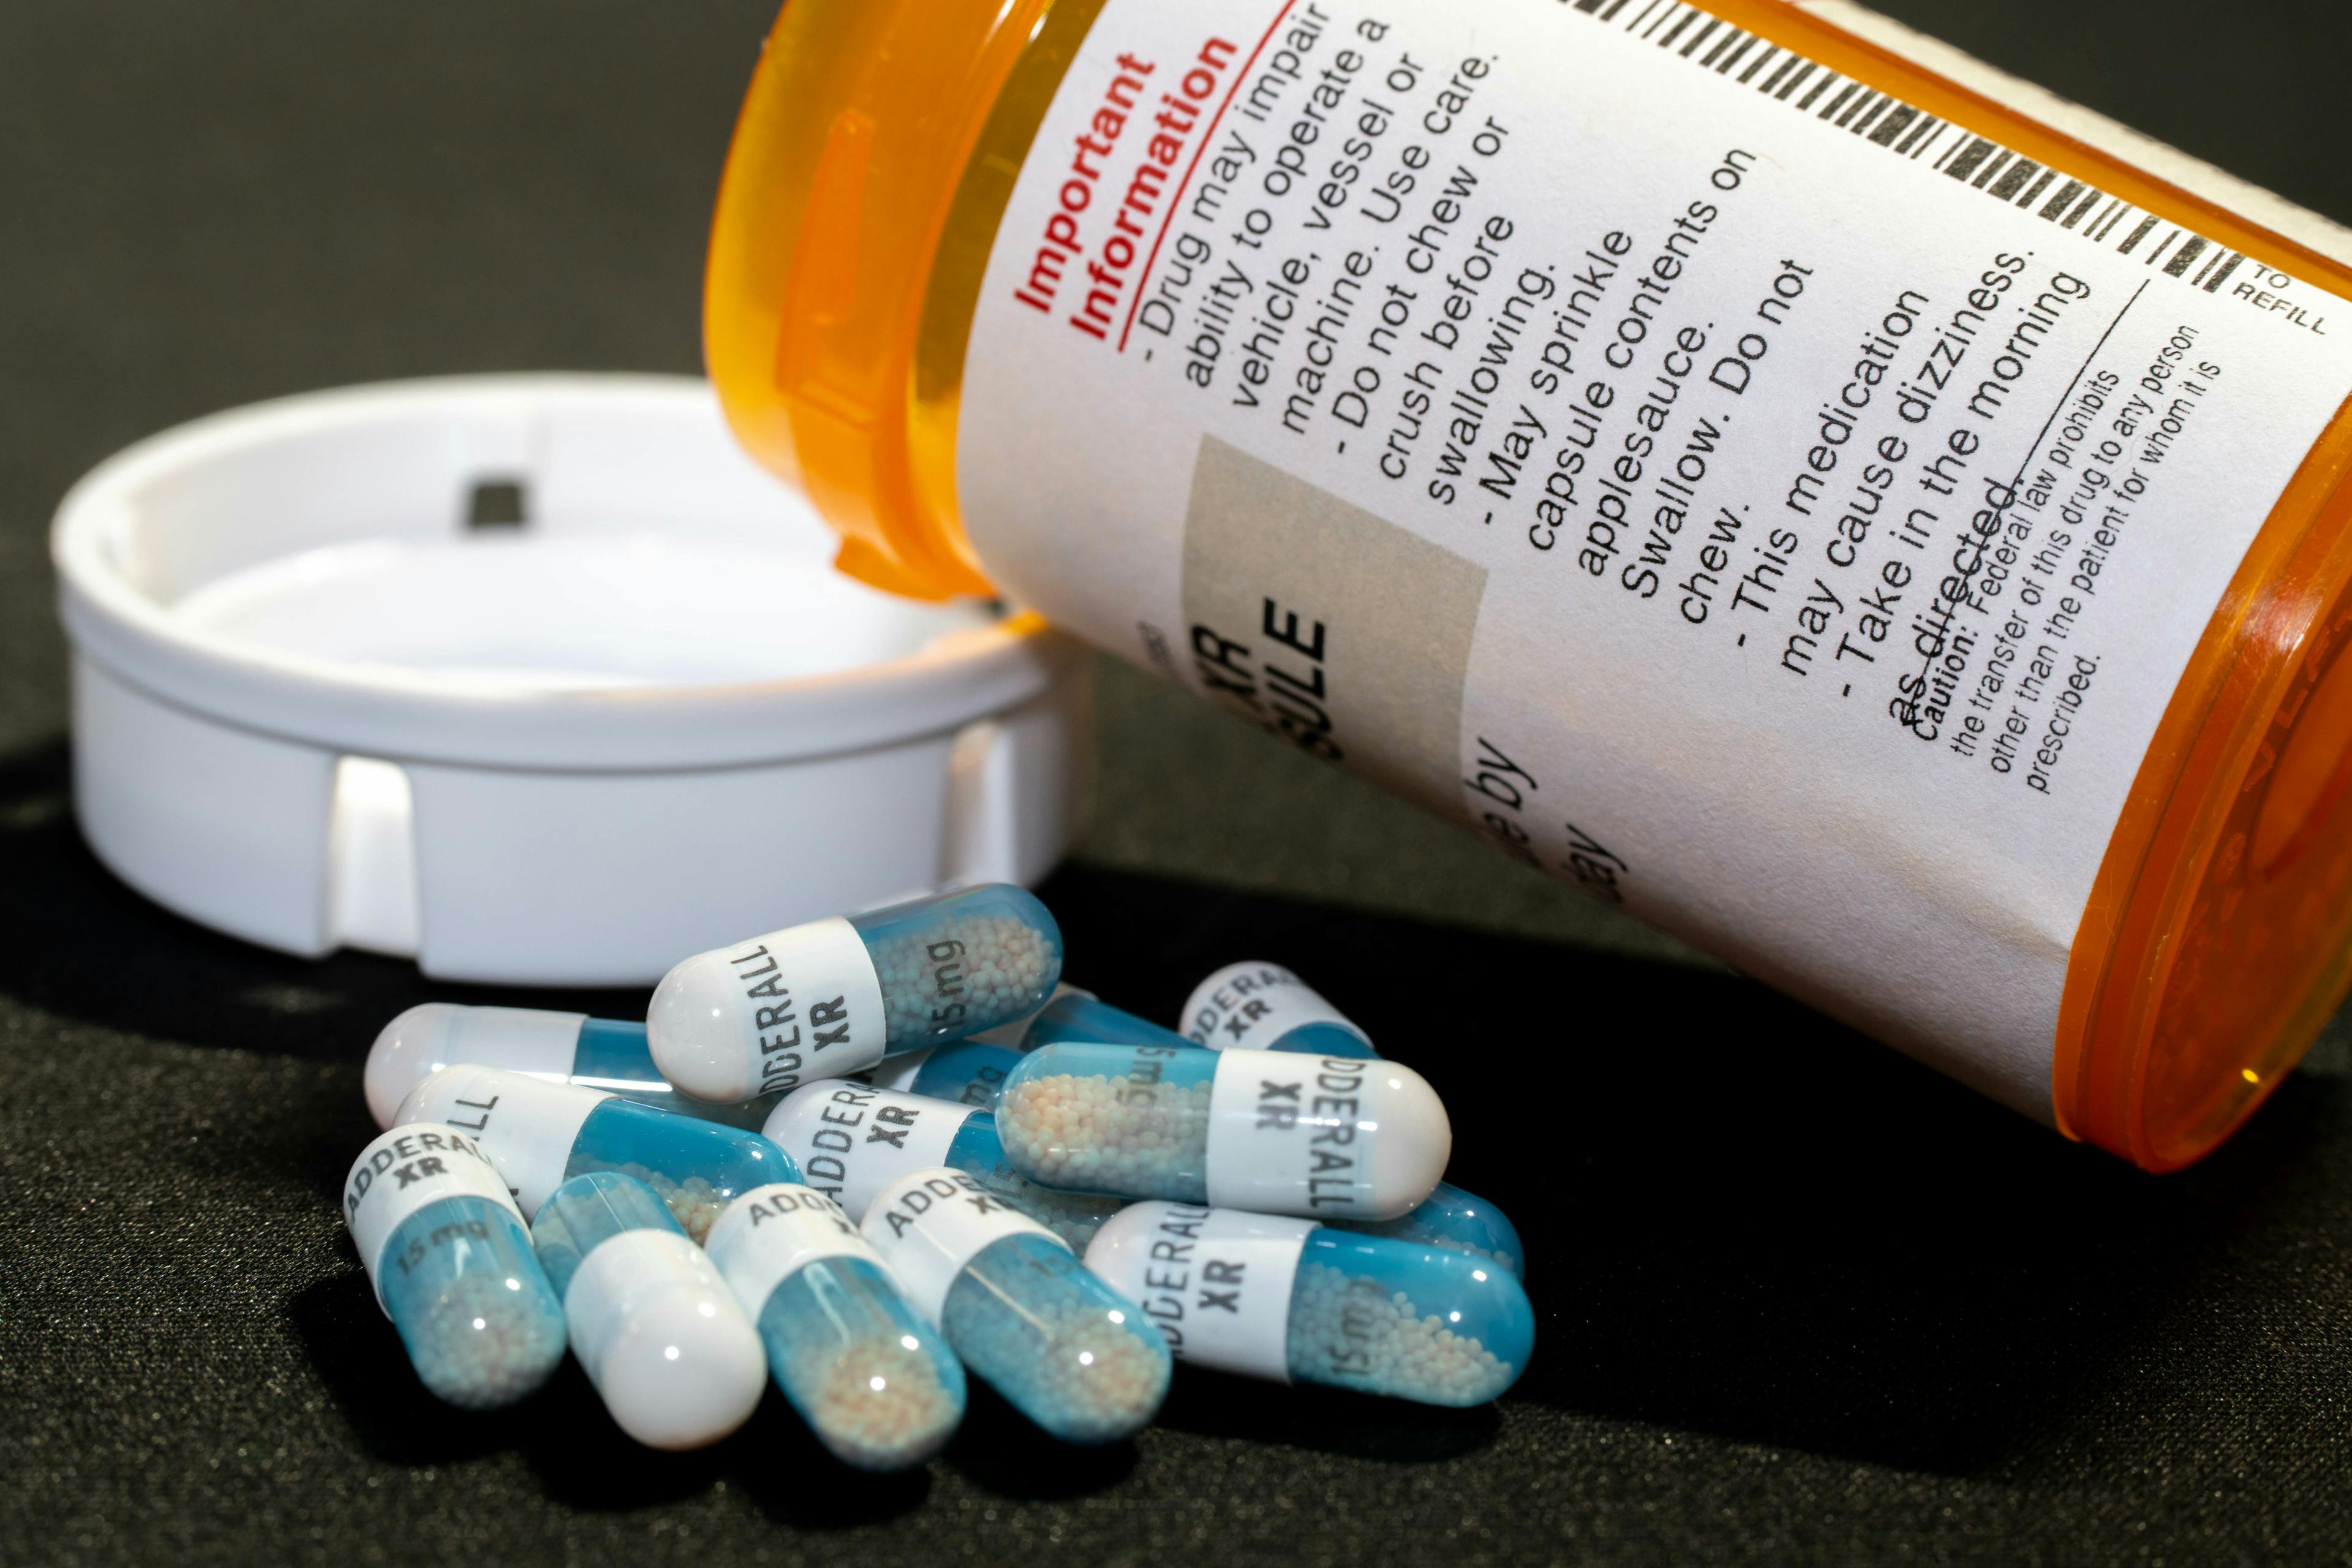 Could ADHD Medication Increase Cardiovascular Disease Risk?